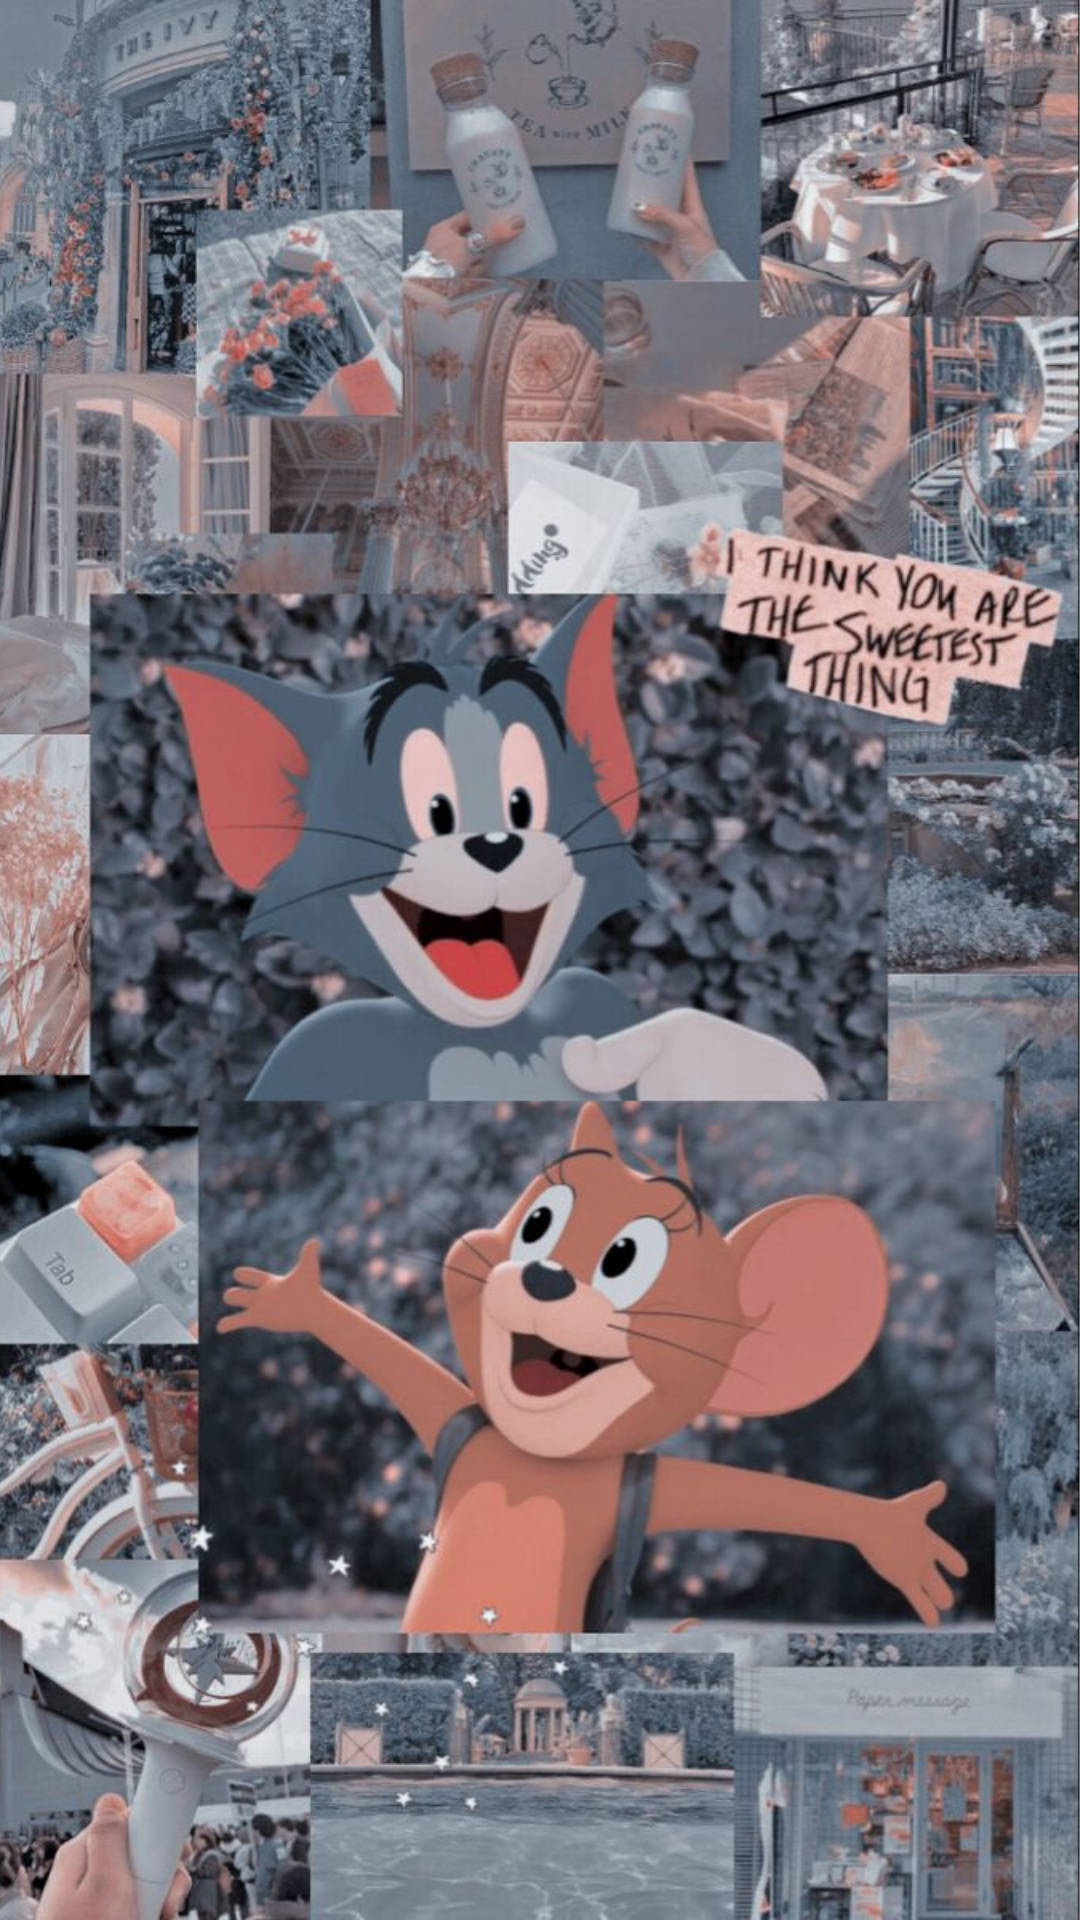 100+] Tom And Jerry Aesthetic Wallpapers | Wallpapers.com